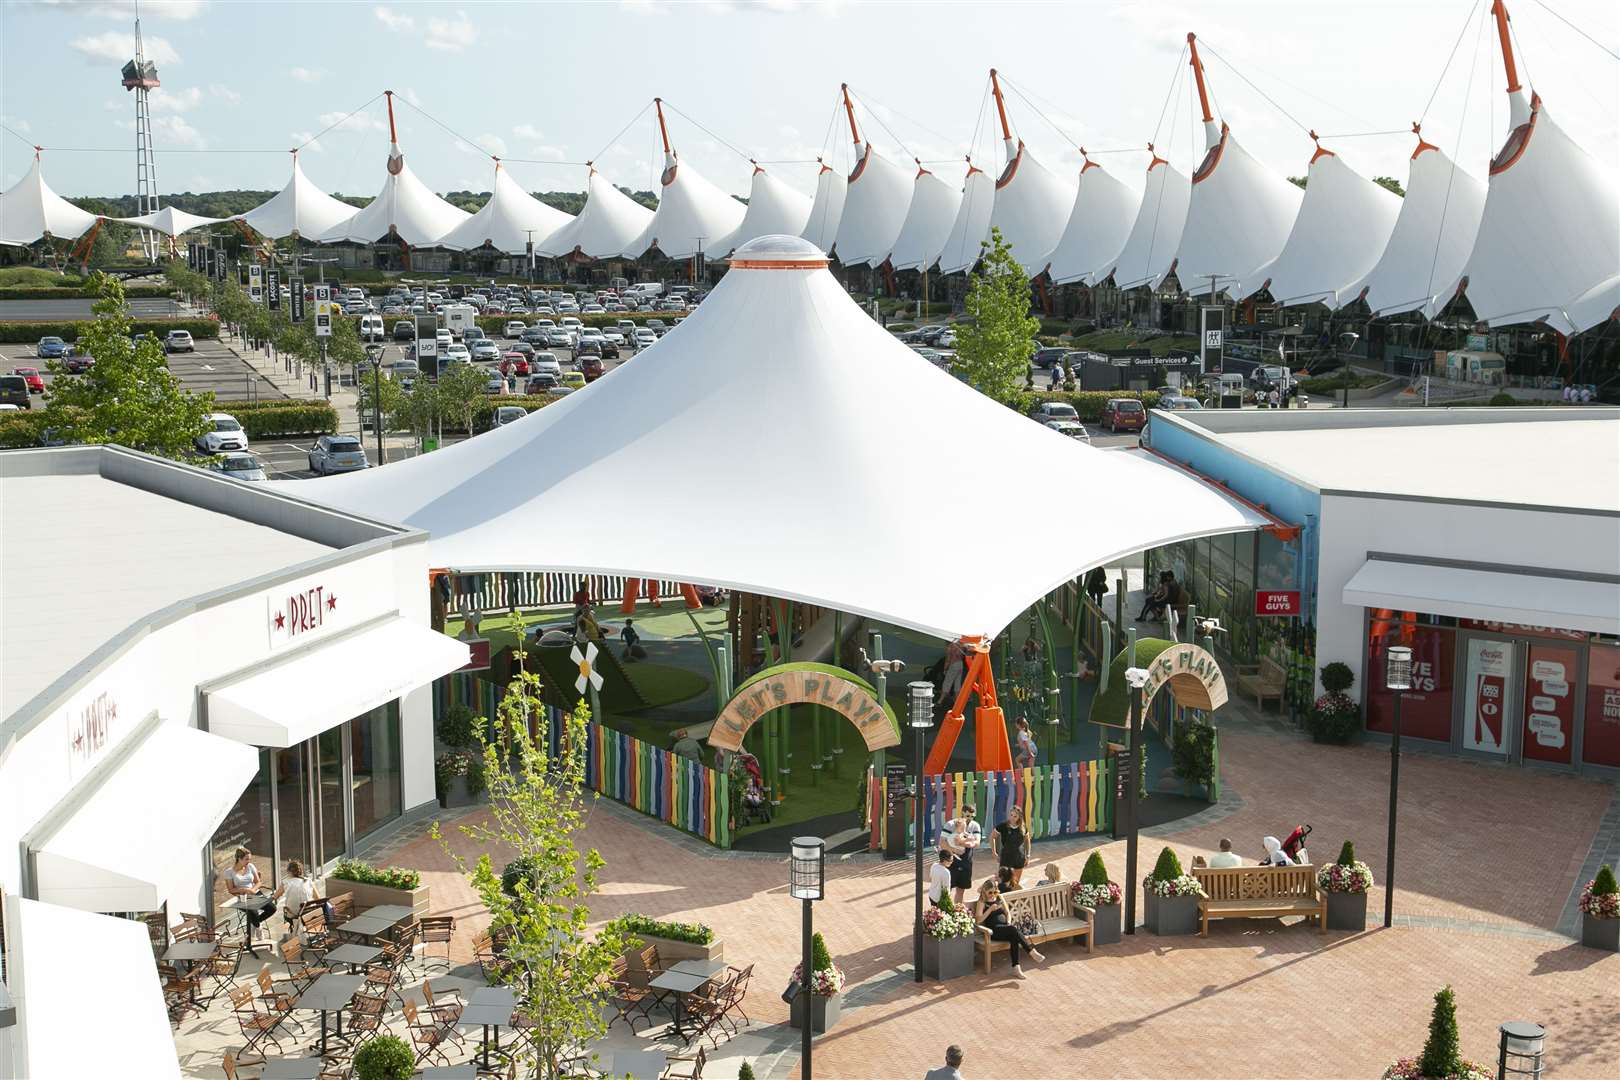 The Ashford Designer Outlet as it looks now